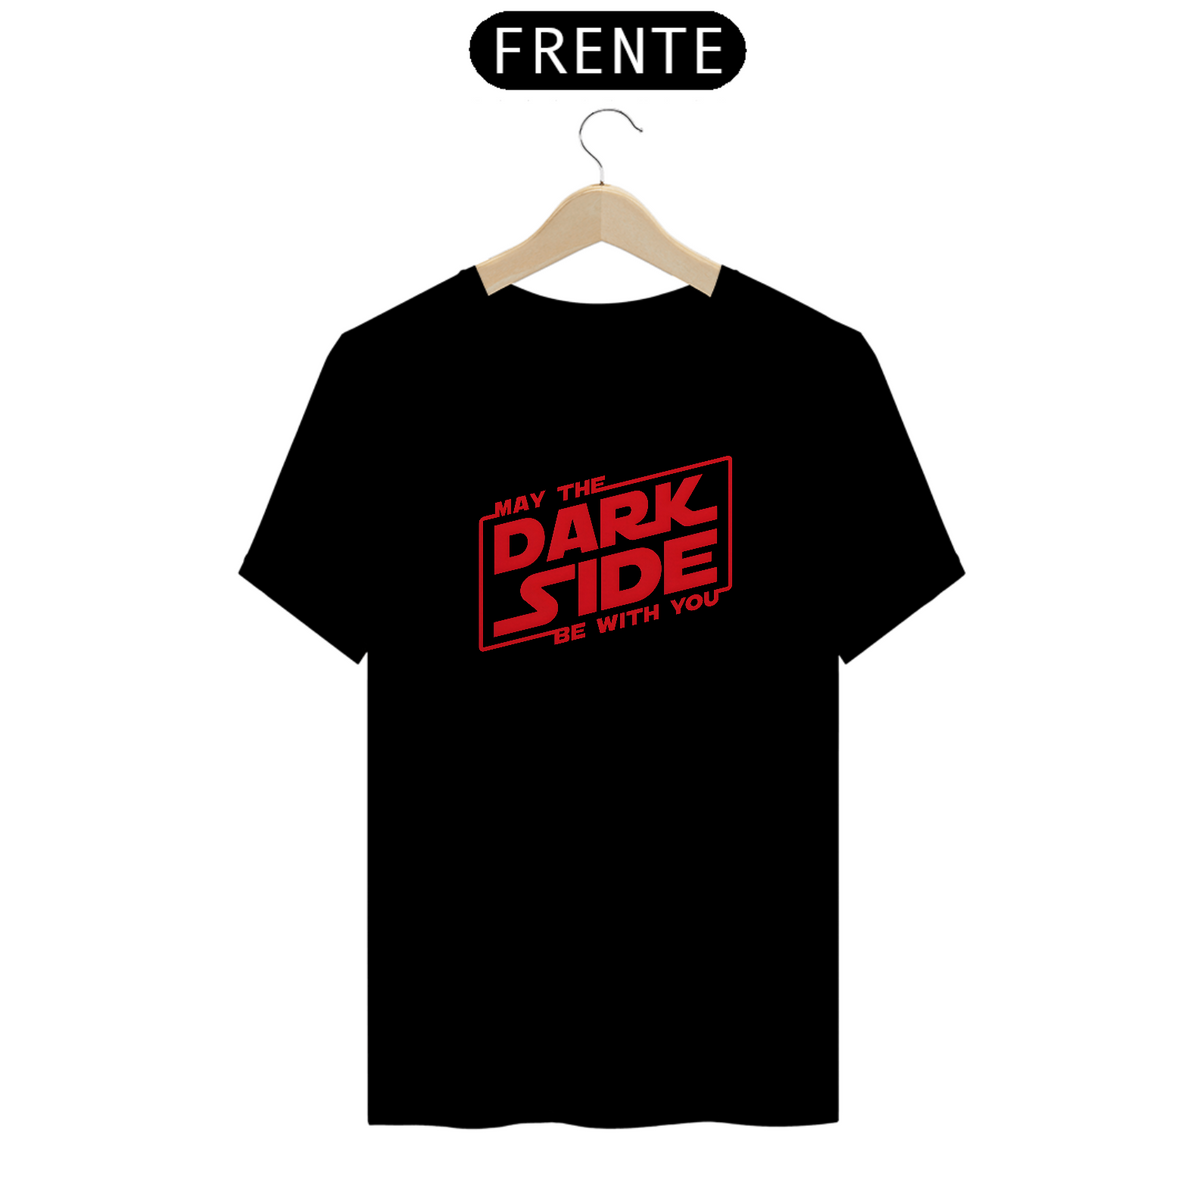 Nome do produto: Camiseta Premium - May The Dark Side Be With You